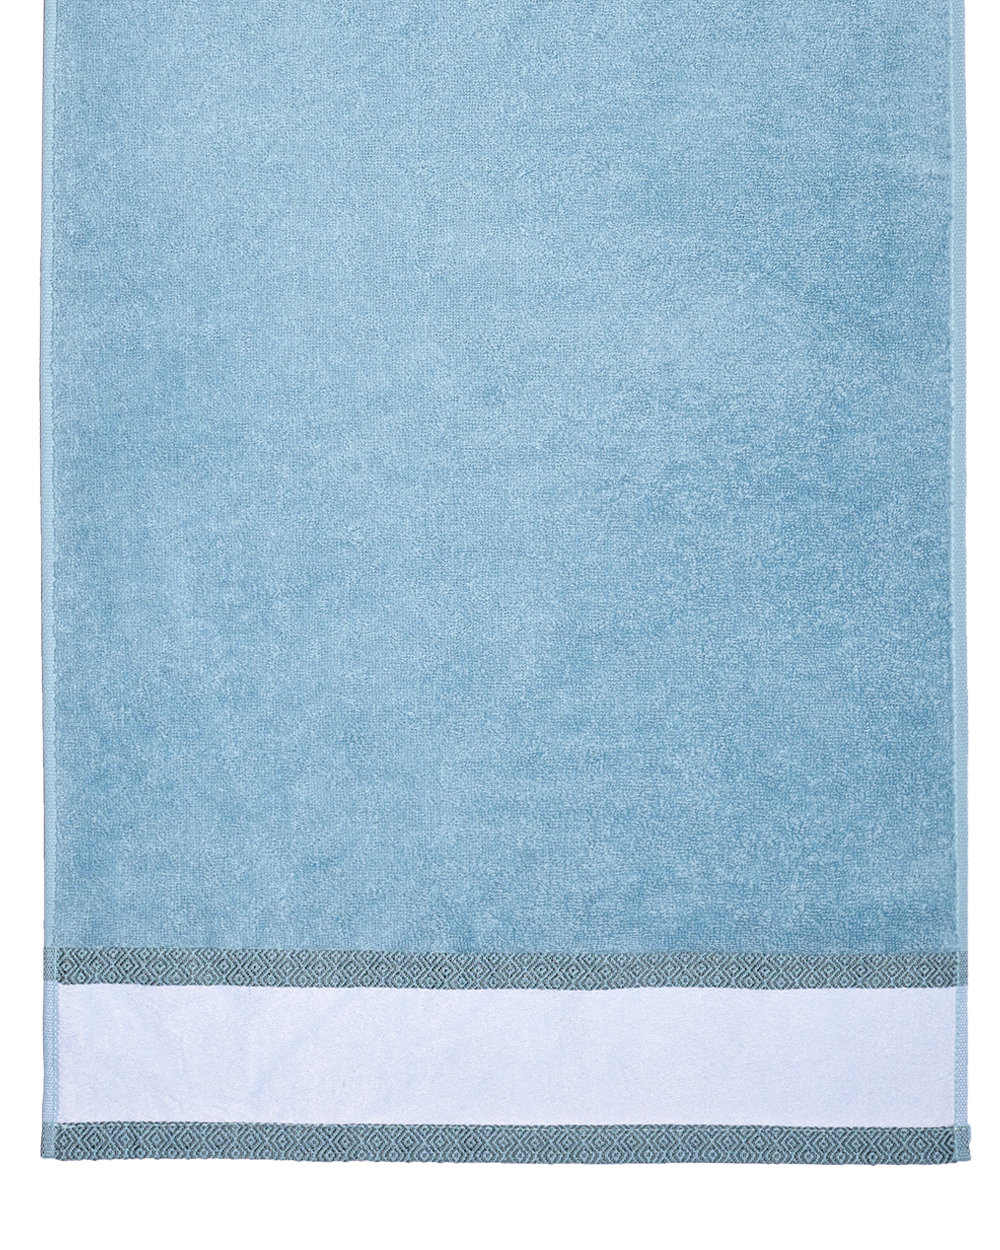 Real Estate Blue Hand Towel (SIZE 16"X 32")